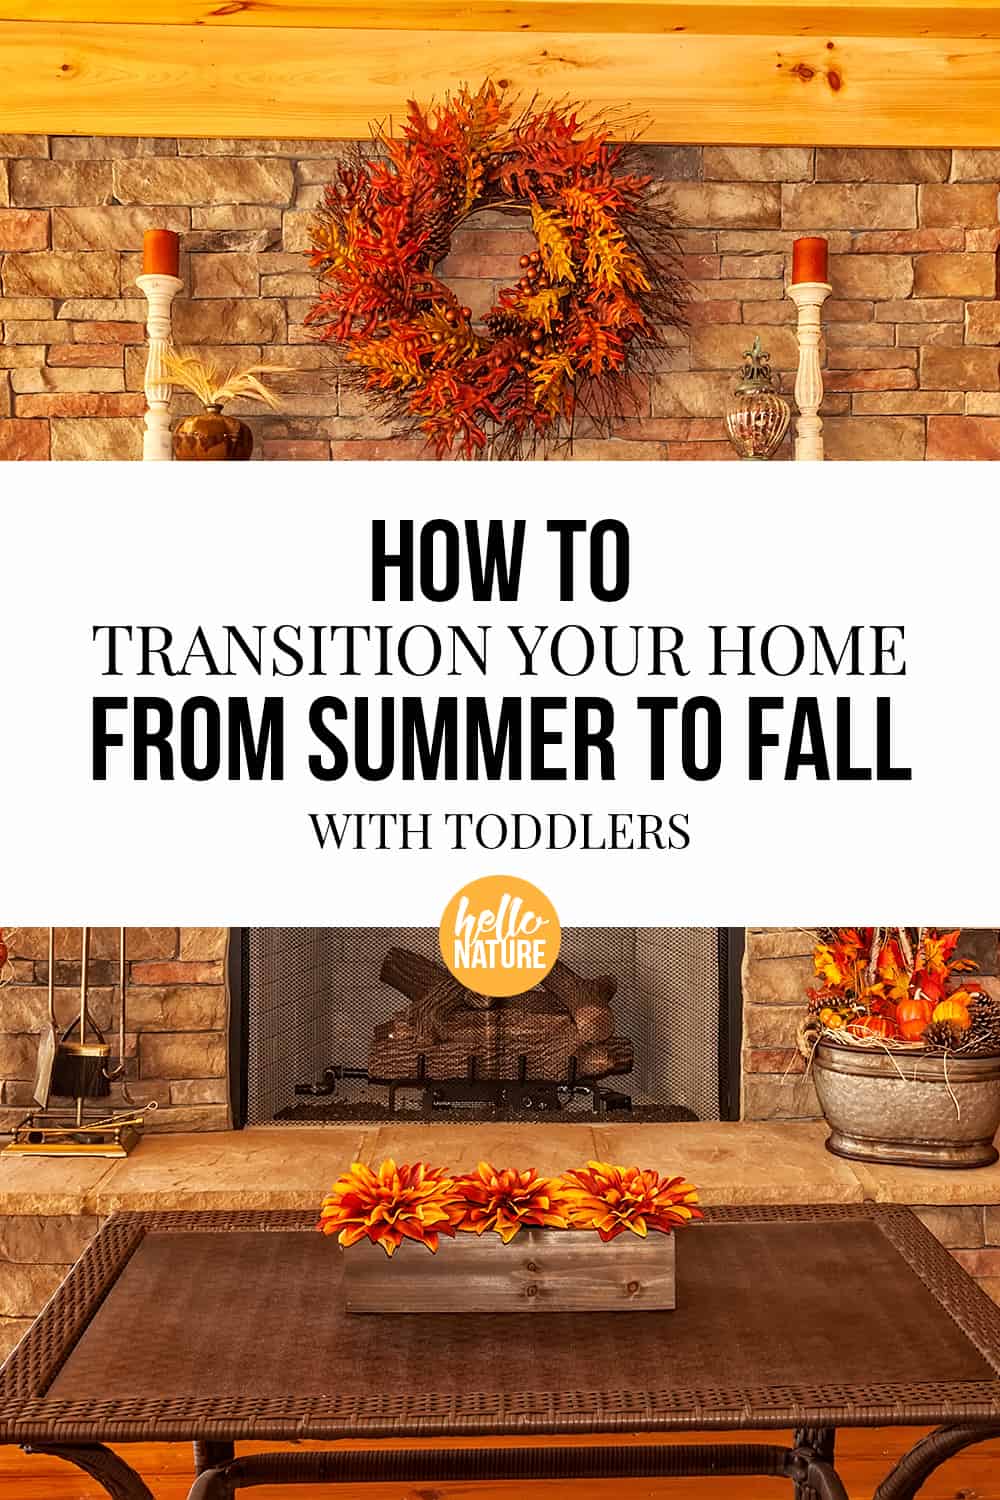 Learn how to transition your home from summer to fall with toddlers with these easy tips and tricks. You'll be able to make your home fall-ready while still keeping it safe for your little ones. #Fall #Autumn #FallHome #HomeDecor #FallHome #AutumnHome